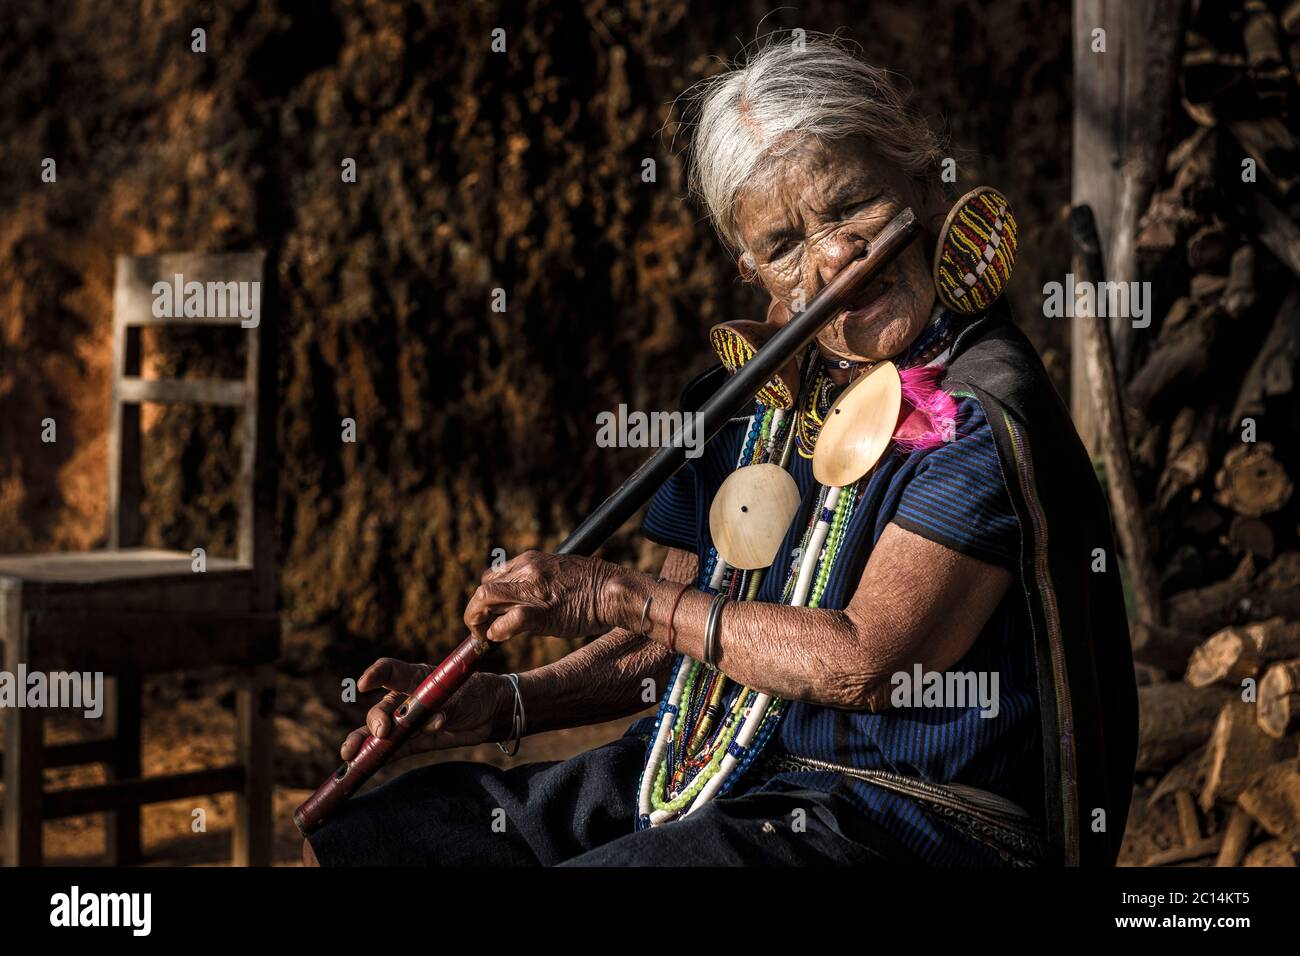 Yaw Shen, a mature K'cho Chin woman with face tattoos, plays traditional nose flute, Chin State, Myanmar Stock Photo